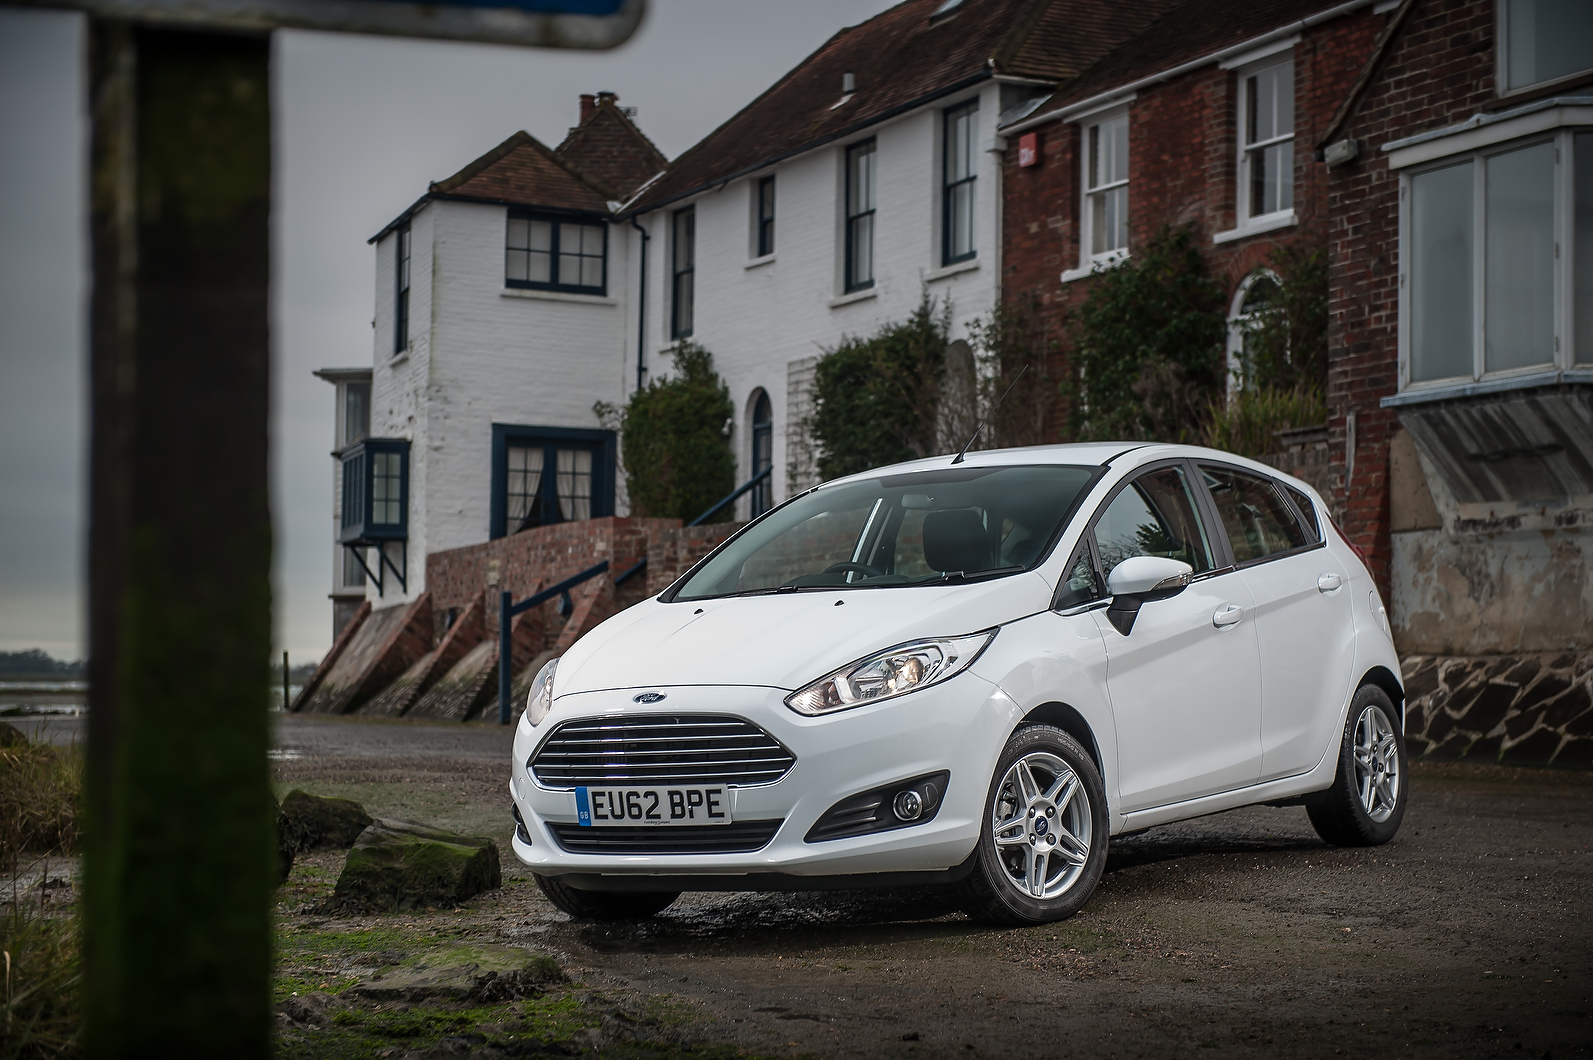 Used Ford Fiesta 2008-2017 review